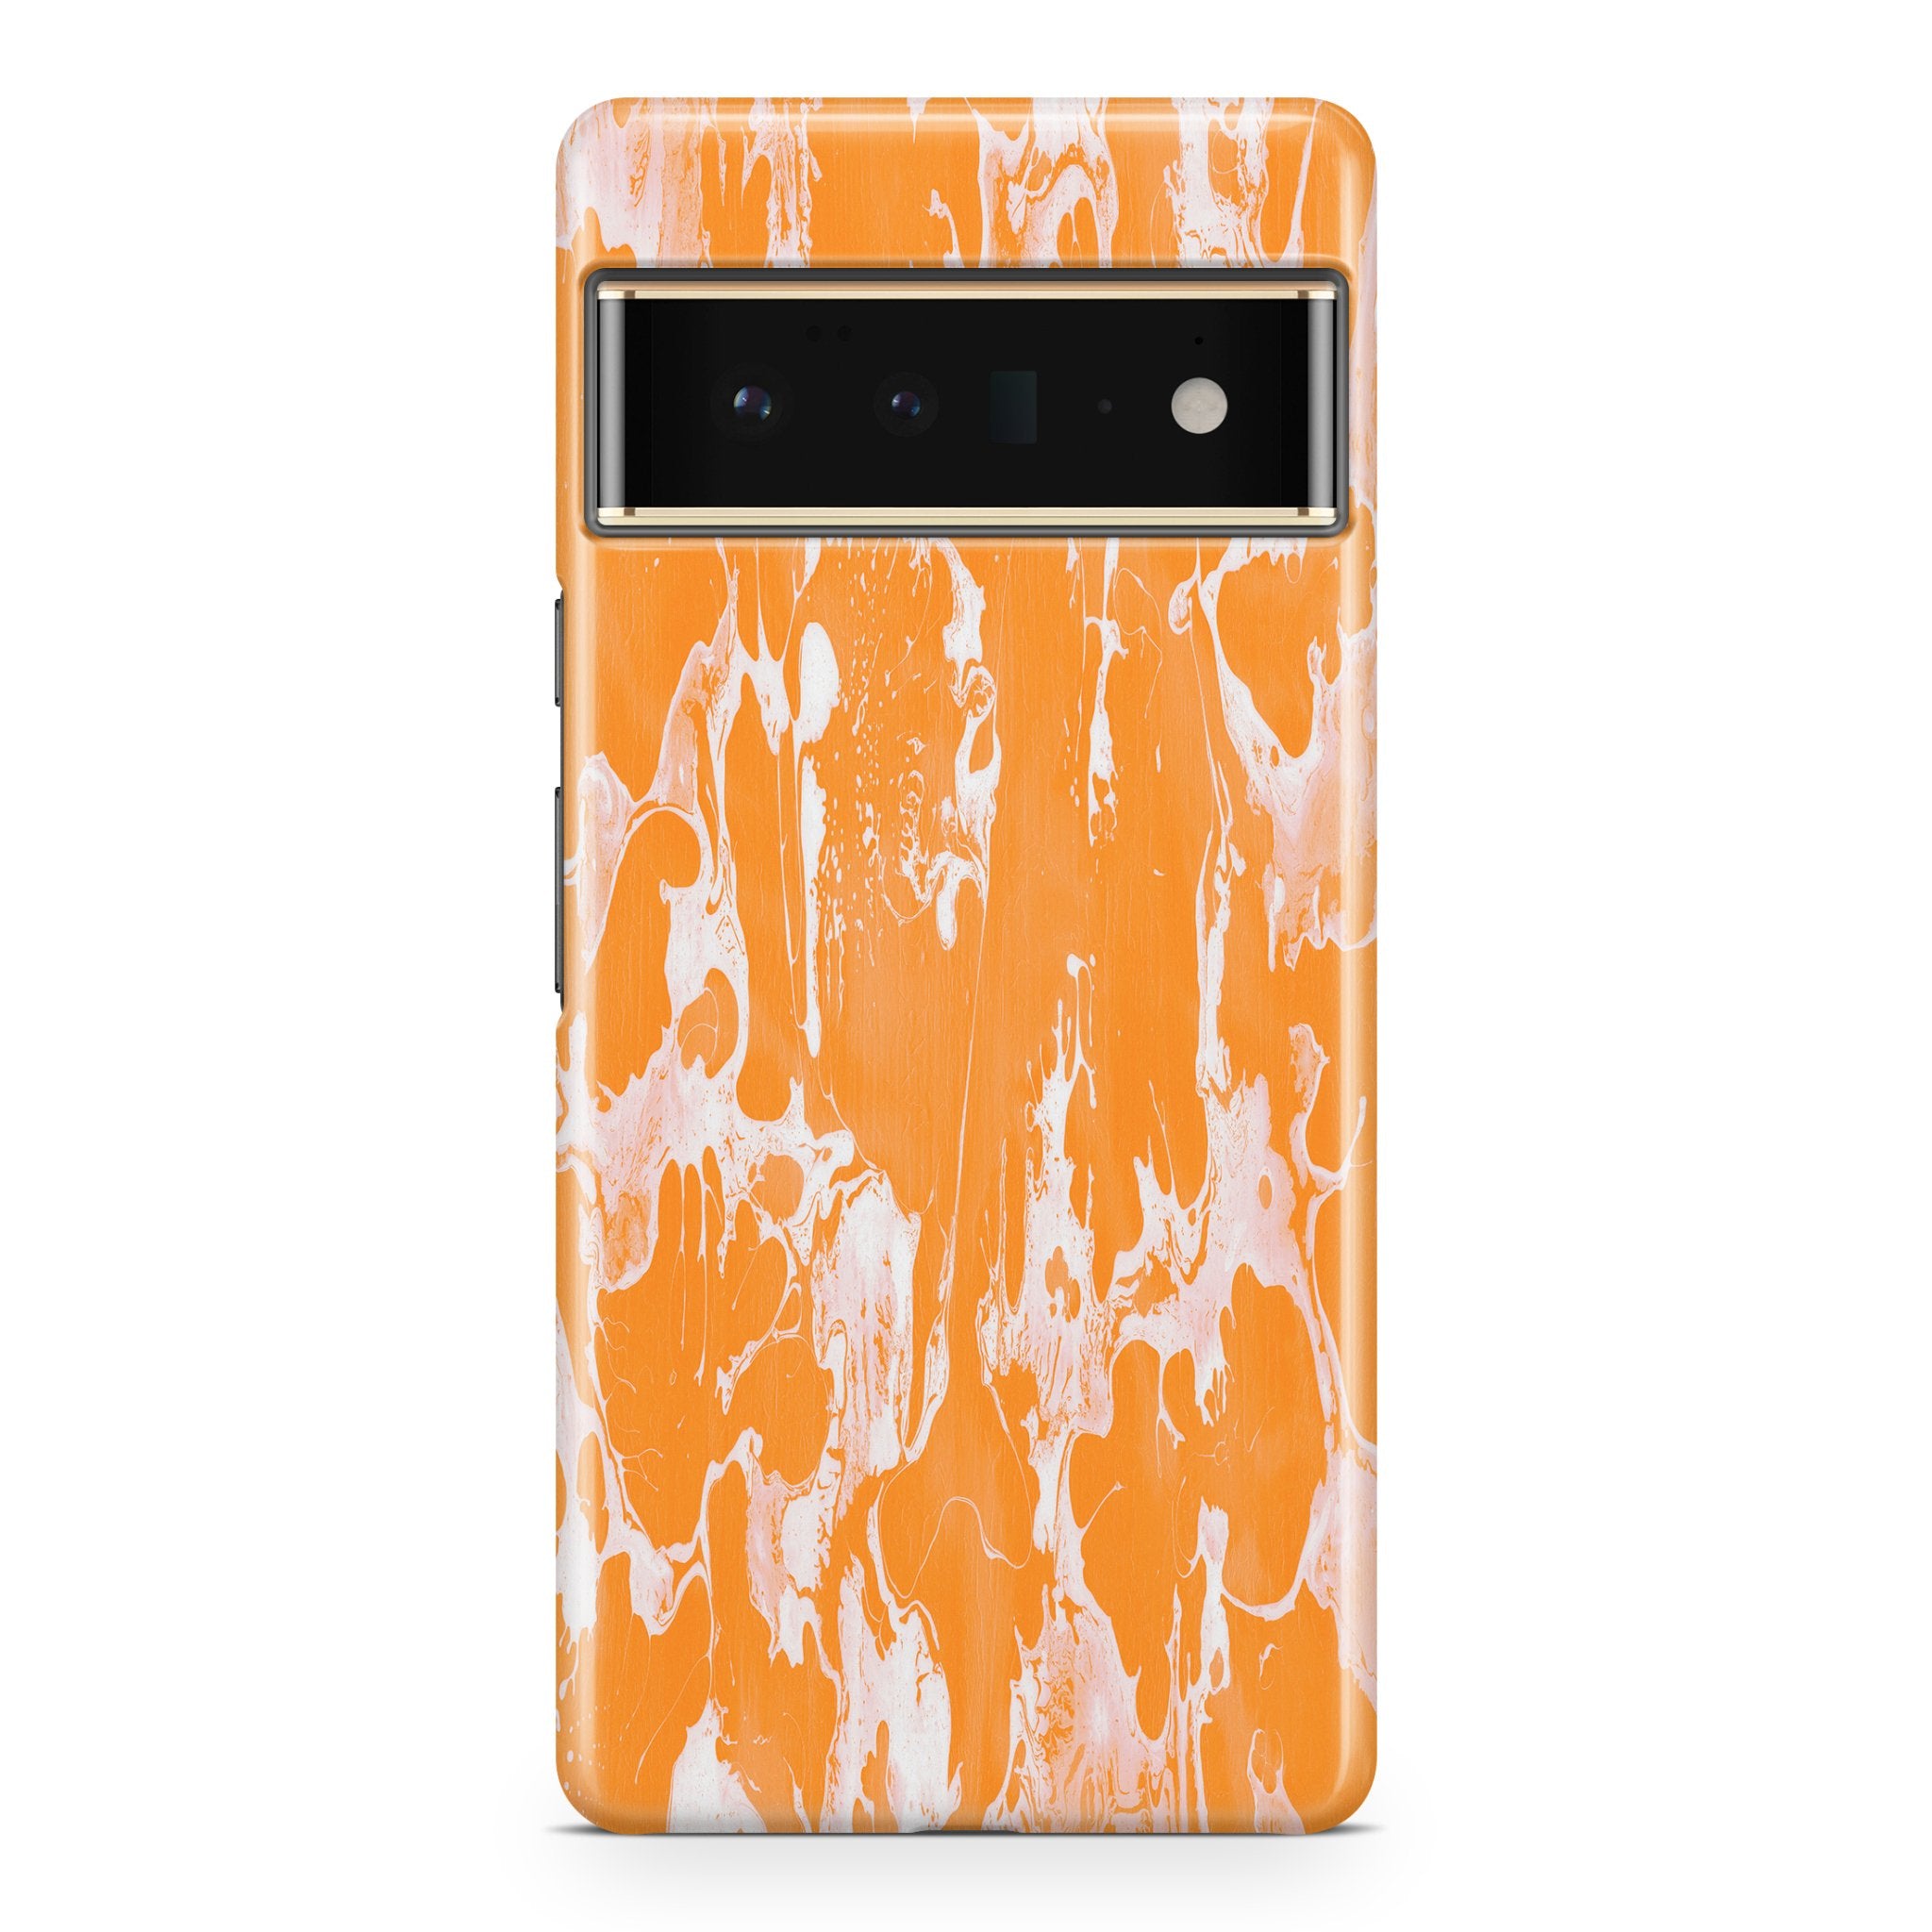 Orange Sherbet - Google phone case designs by CaseSwagger